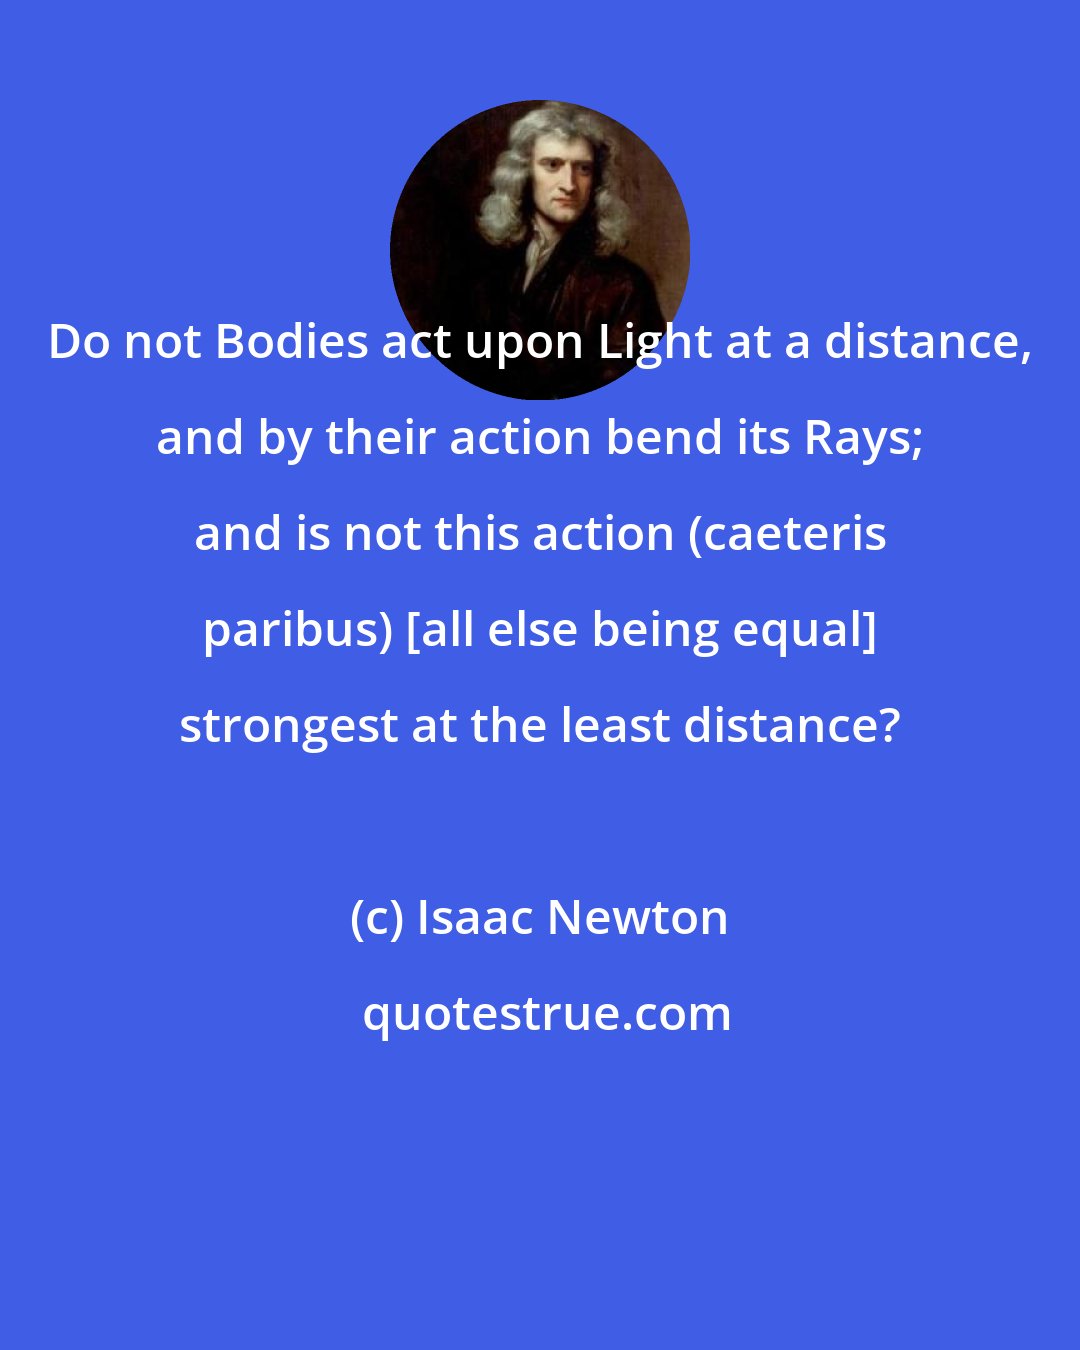 Isaac Newton: Do not Bodies act upon Light at a distance, and by their action bend its Rays; and is not this action (caeteris paribus) [all else being equal] strongest at the least distance?